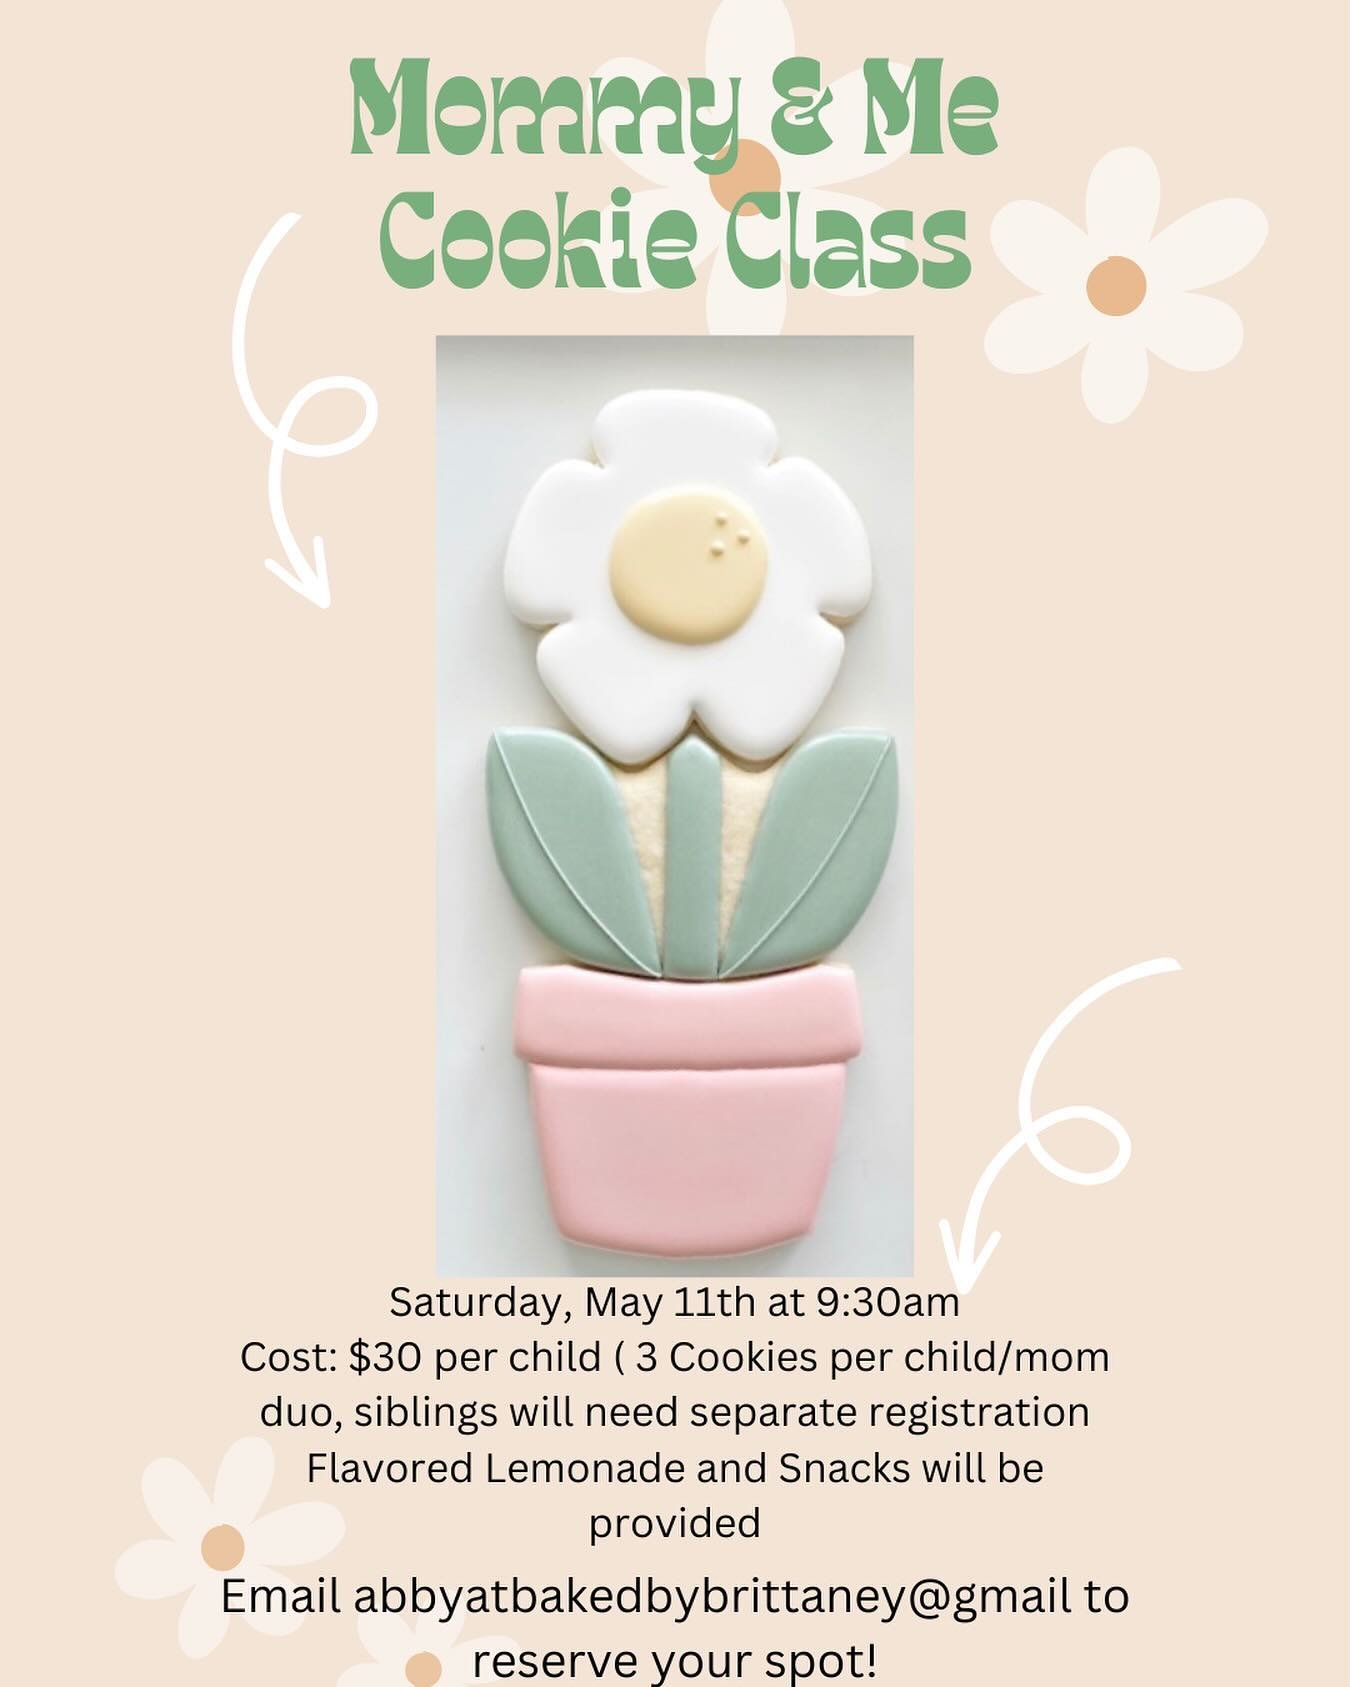 Join us for a cute Mommy &amp; Me morning of sugar cookie decorating 🌷⁣
⁣
Saturday, May 11th at 9:30am at BBB! (𝘤𝘭𝘢𝘴𝘴𝘦𝘴 𝘶𝘴𝘶𝘢𝘭𝘭𝘺 𝘭𝘢𝘴𝘵 𝟷.𝟻 𝘩𝘰𝘶𝘳𝘴) ⁣
⁣
Each mama &amp; kiddo duo will have 3 cookies to decorate, and everyone will